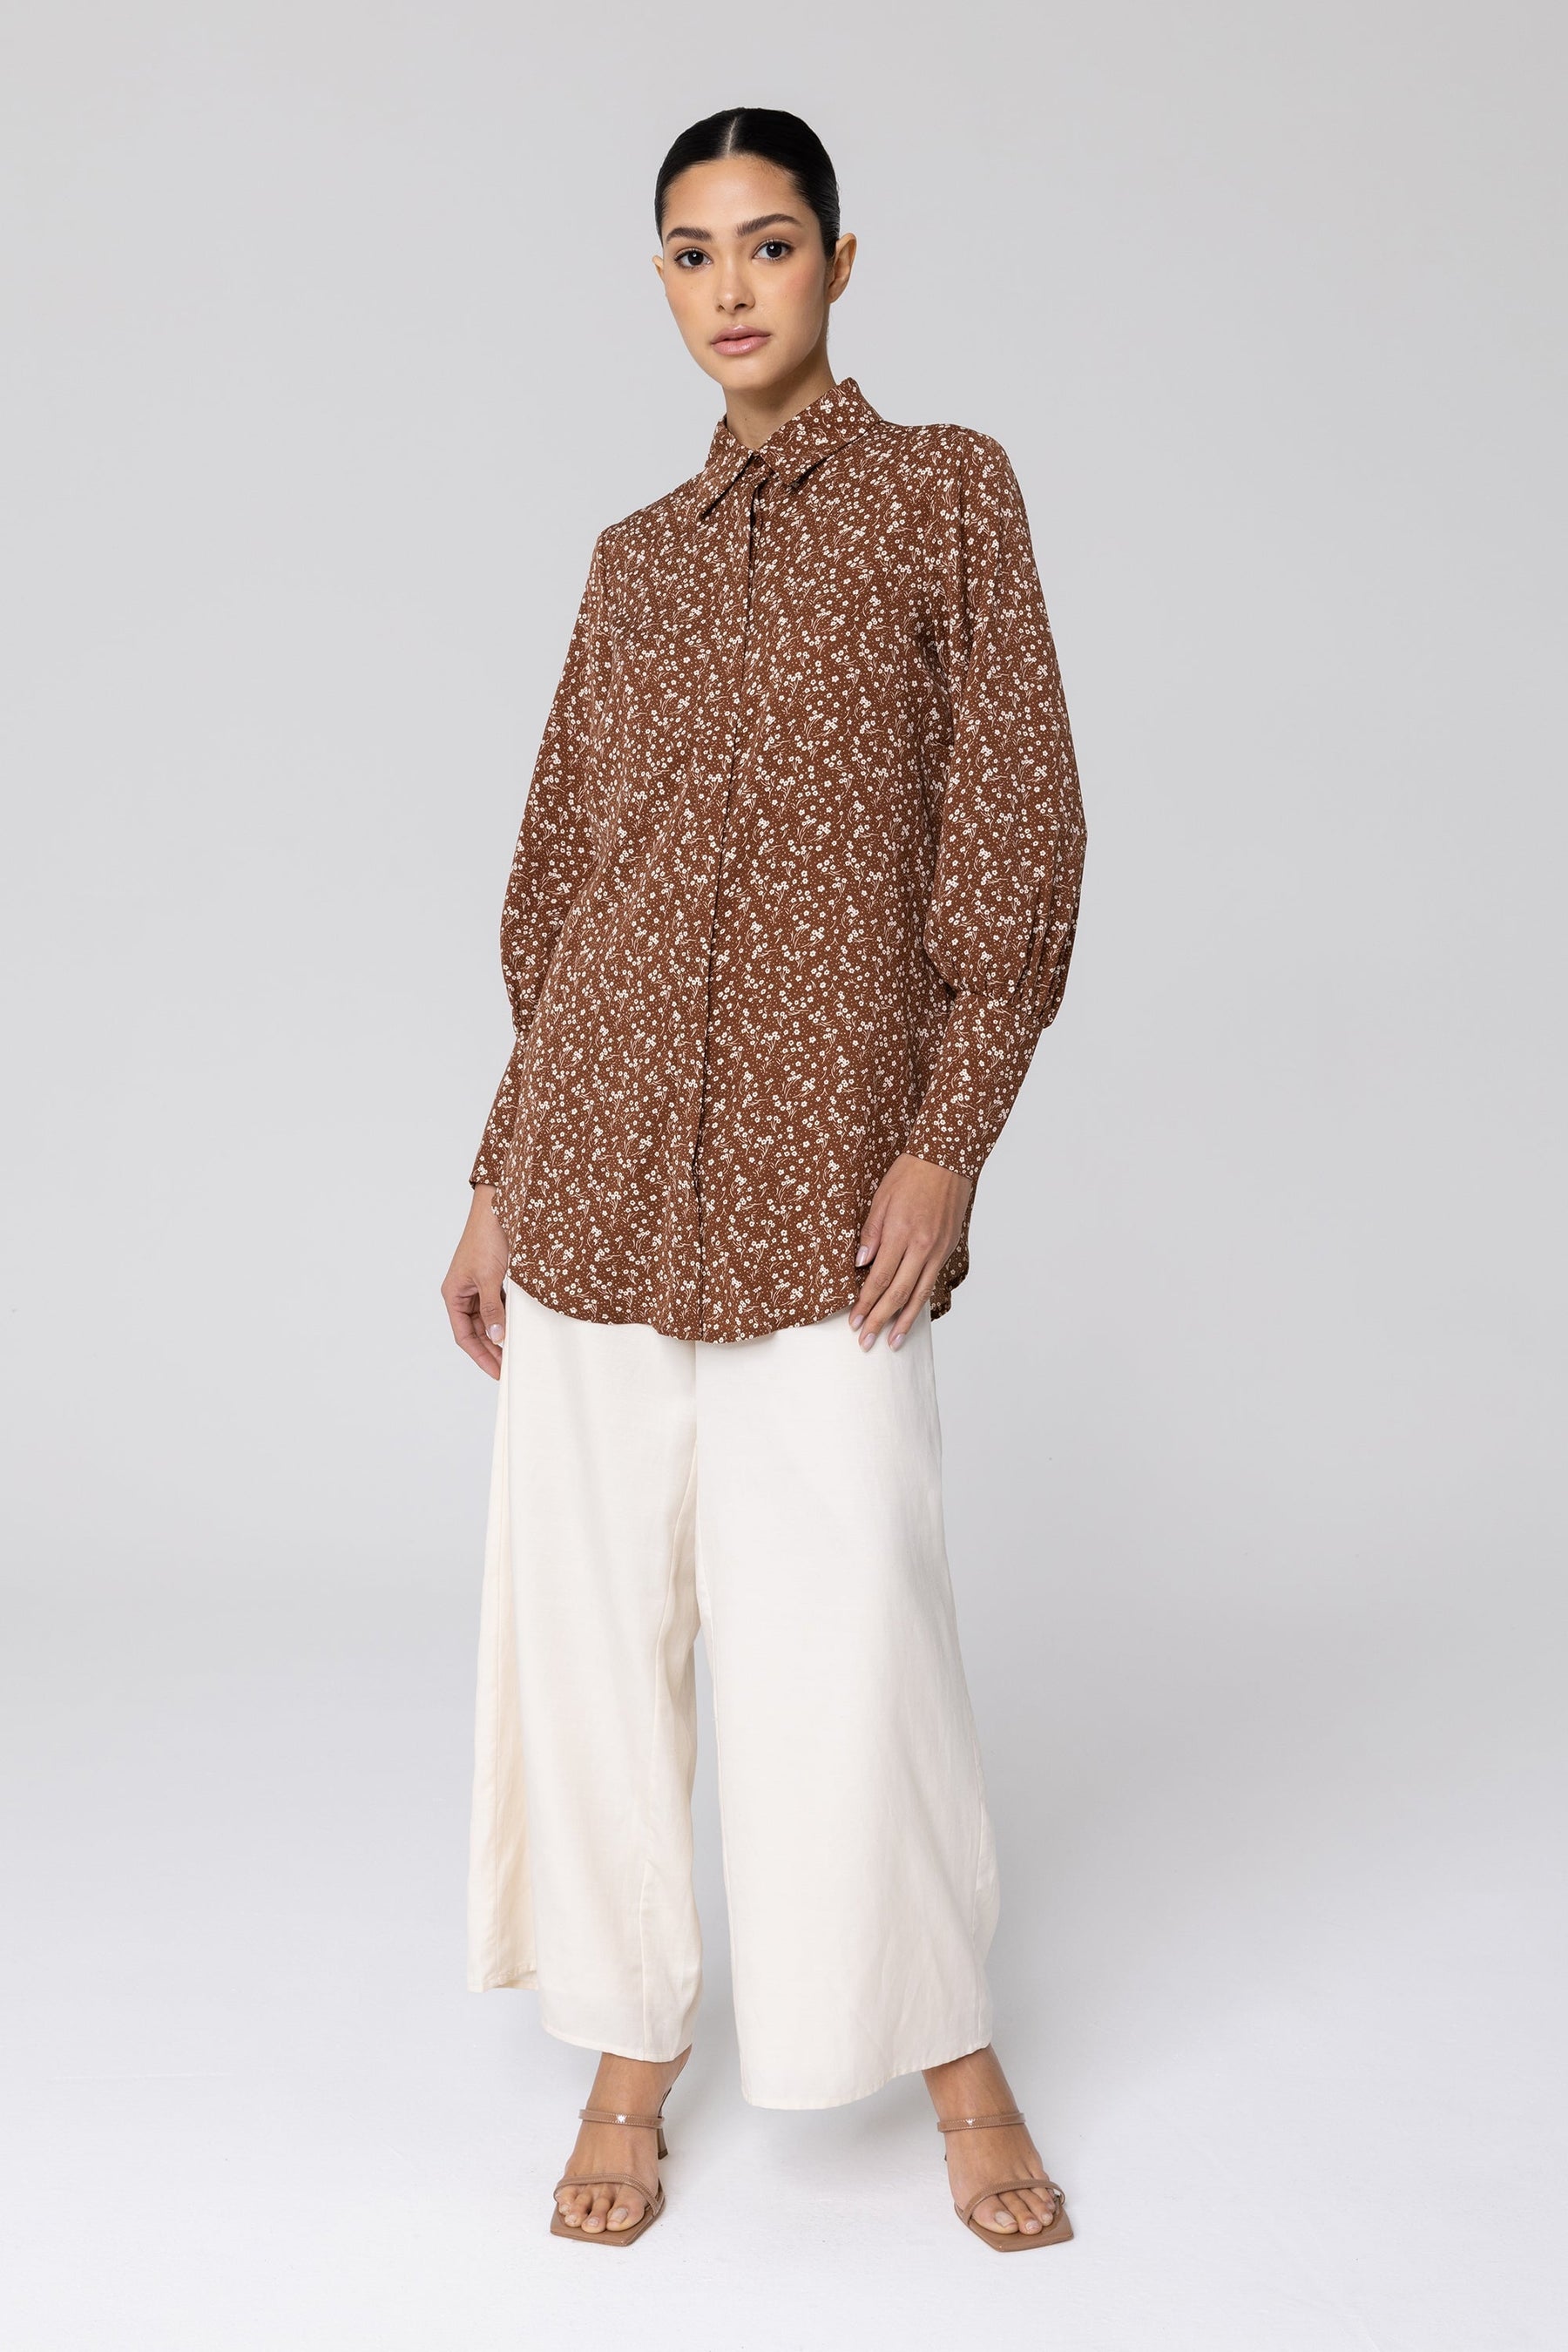 Brown Floral Button Down Top Veiled Collection 